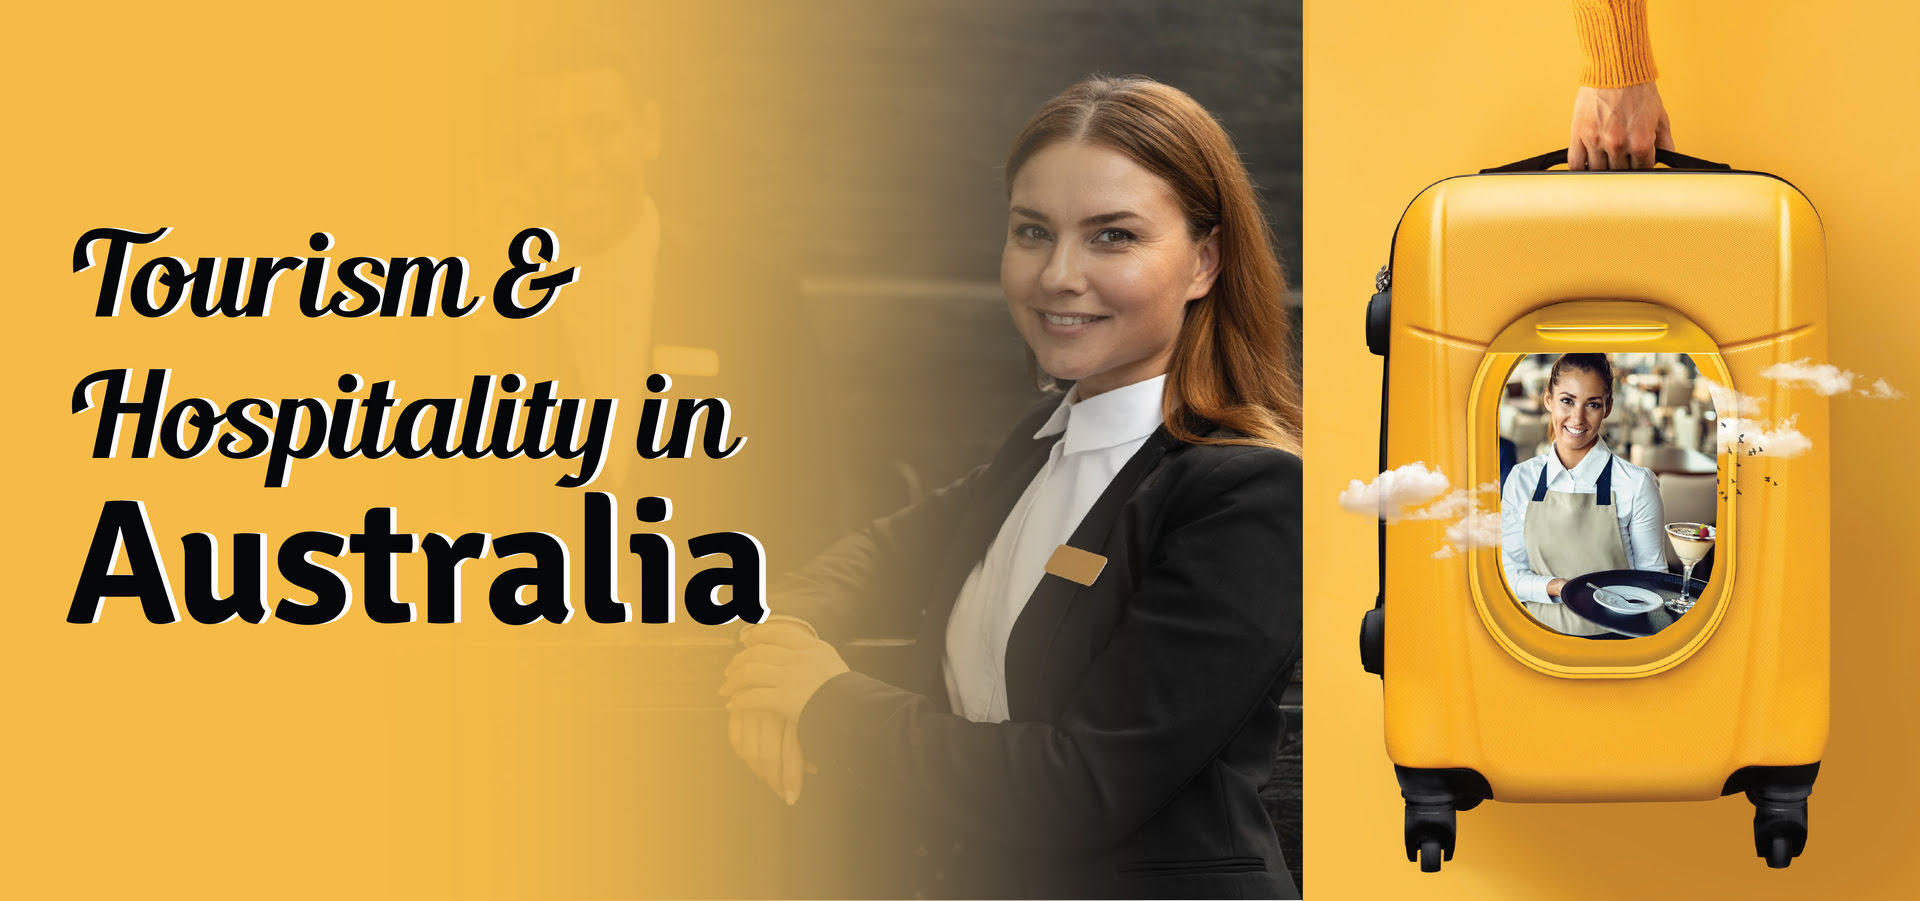 tourism-and-hospitality-in-austrlia